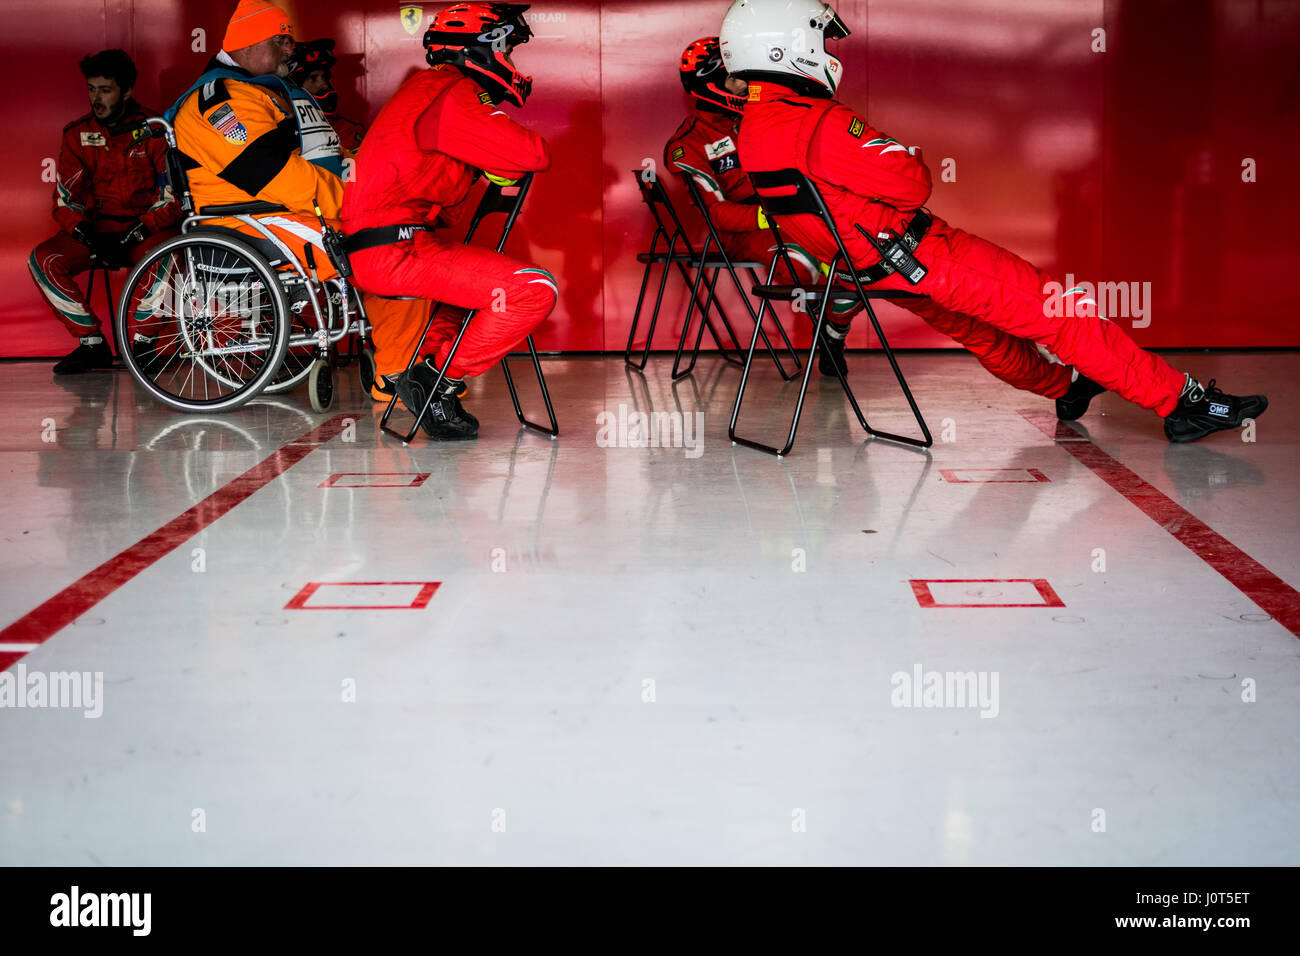 Towcester, Northamptonshire, UK. 16th Apr, 2017. FIA WEC racing team AF Corse during the 6 Hours of Silverstone of the FIA World Endurance Championship Autograph session at Silverstone Circuit Credit: Gergo Toth/Alamy Live News Stock Photo